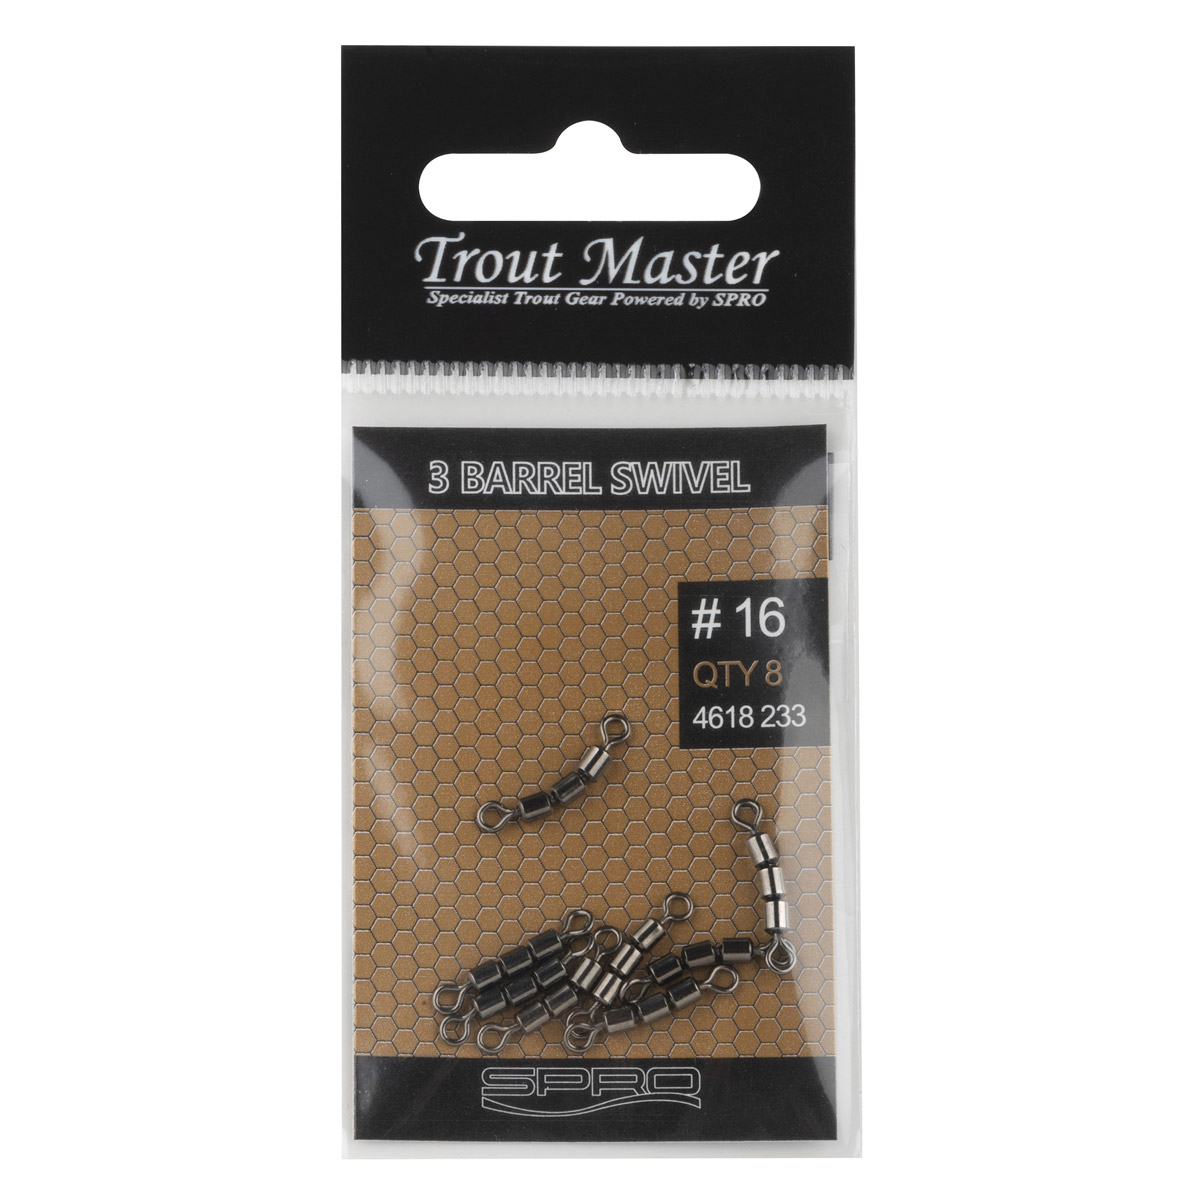 Spro Trout Master 3-Jointed Wartel -  20 -  12 -  22 -  14 -  16 -  18